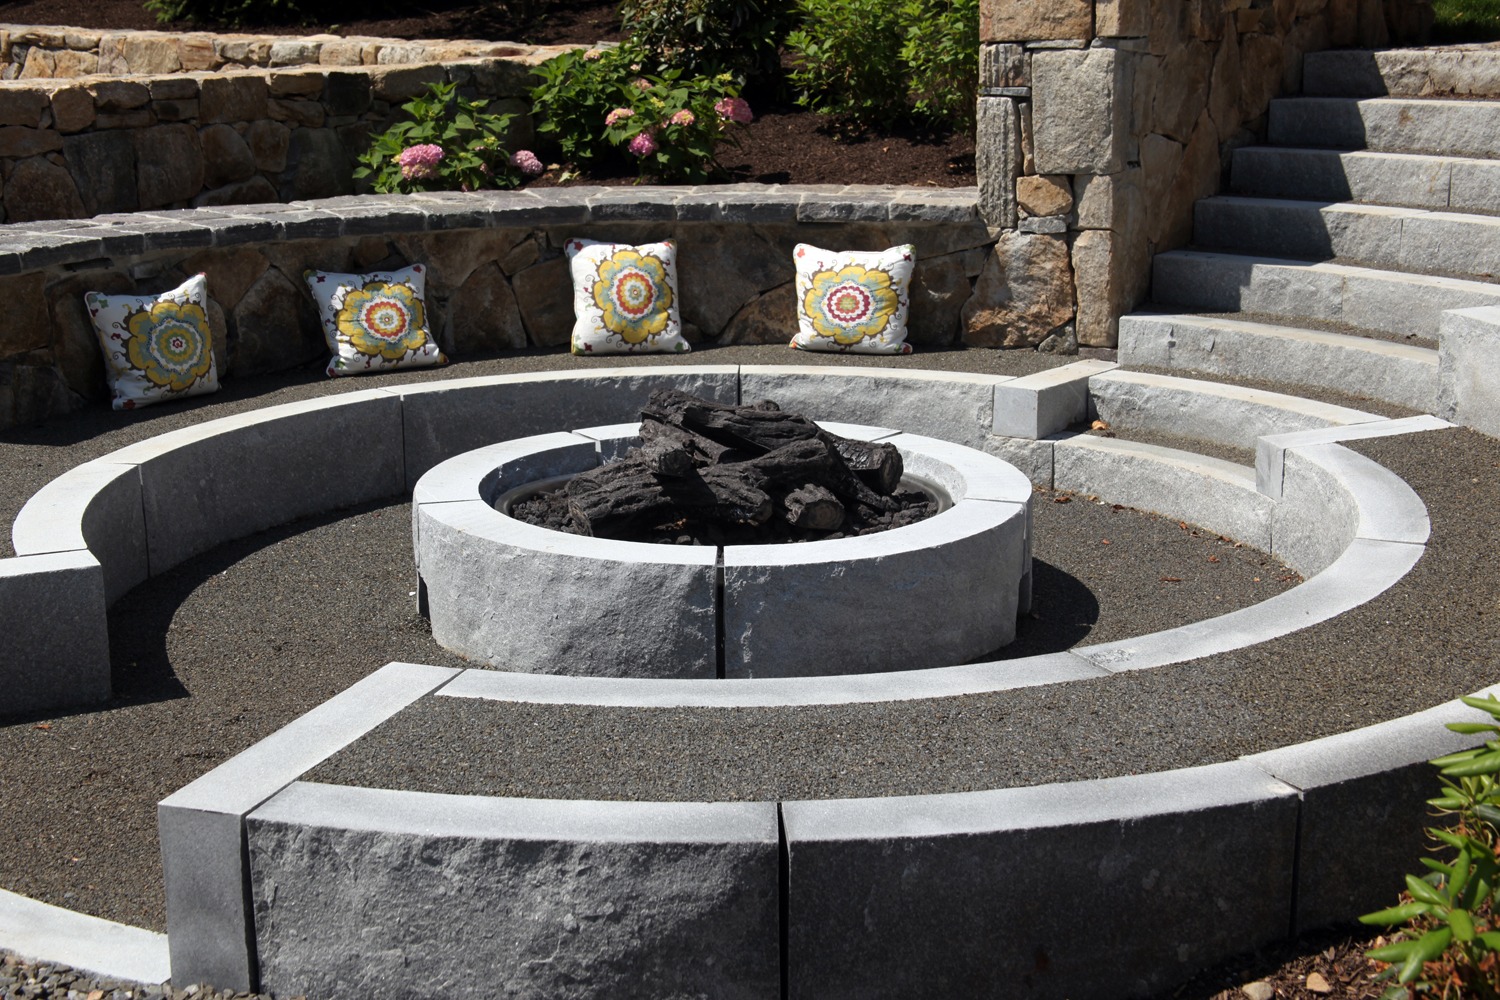 An outdoor stone fire pit sits at the center of curved bench seating with decorative pillows. Stone stairs lead up to an adjacent area.